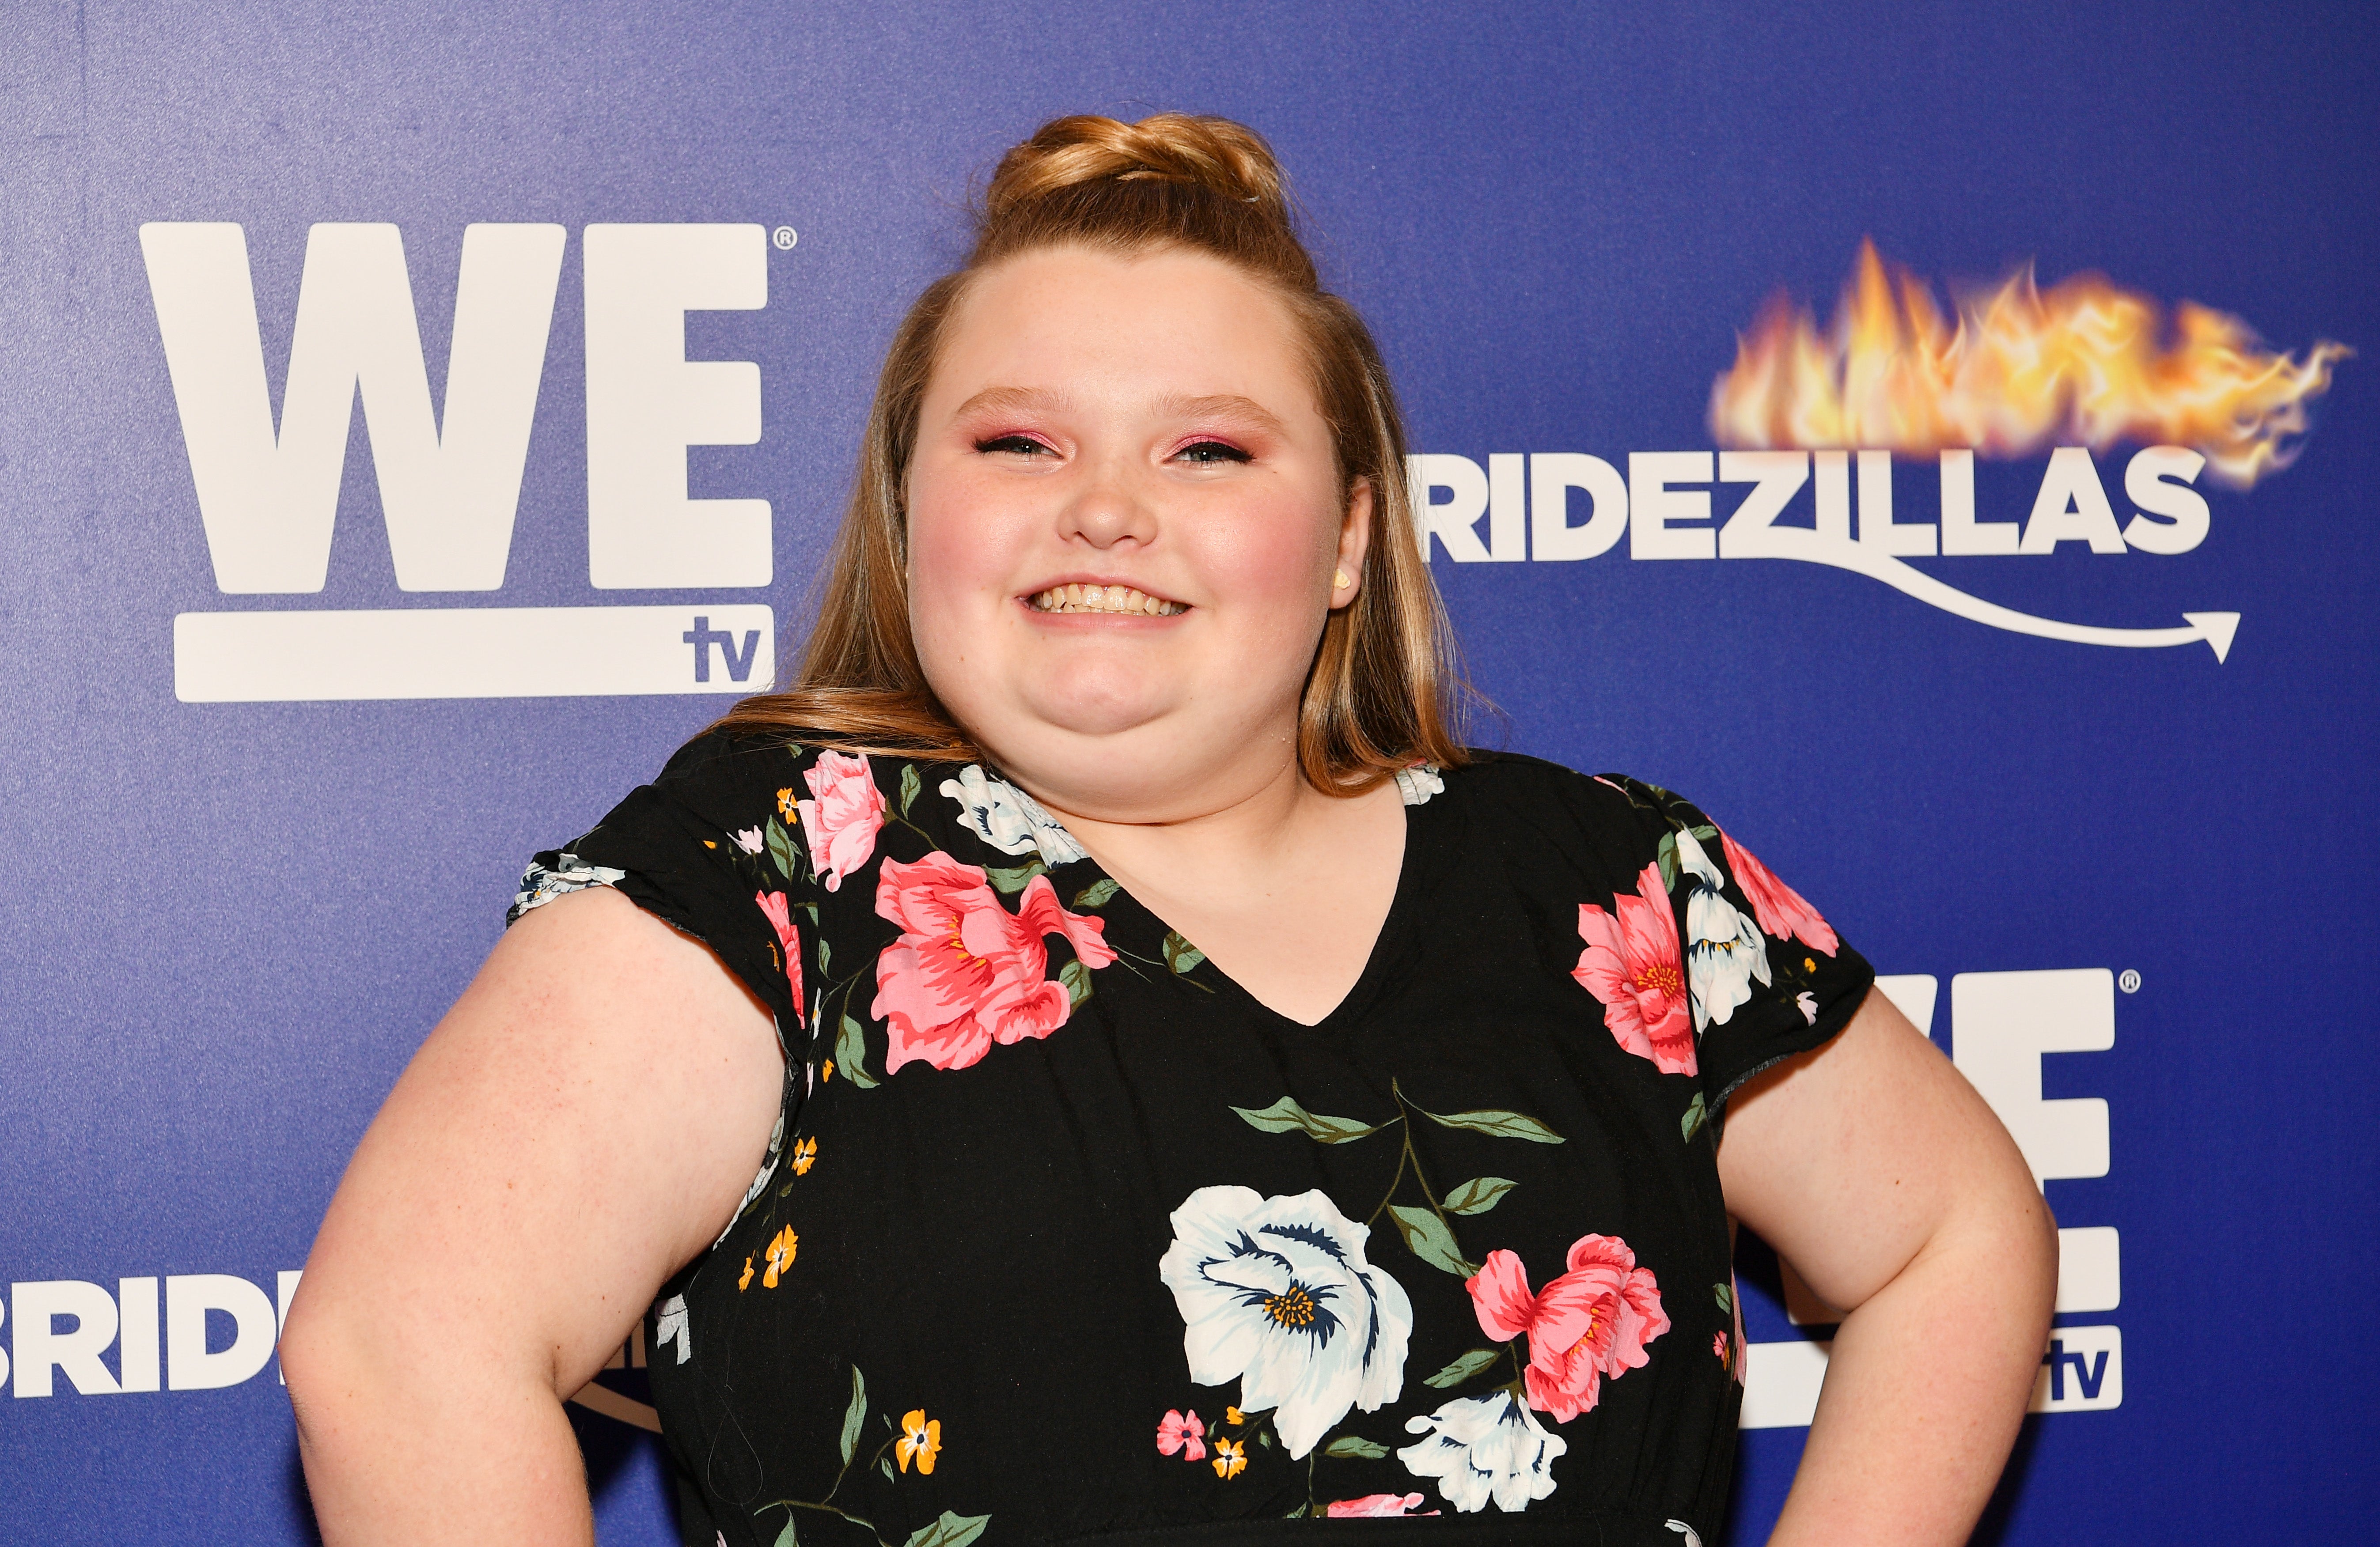 Alana “Honey Boo Boo” Thompson talks about growing up in the spotlight